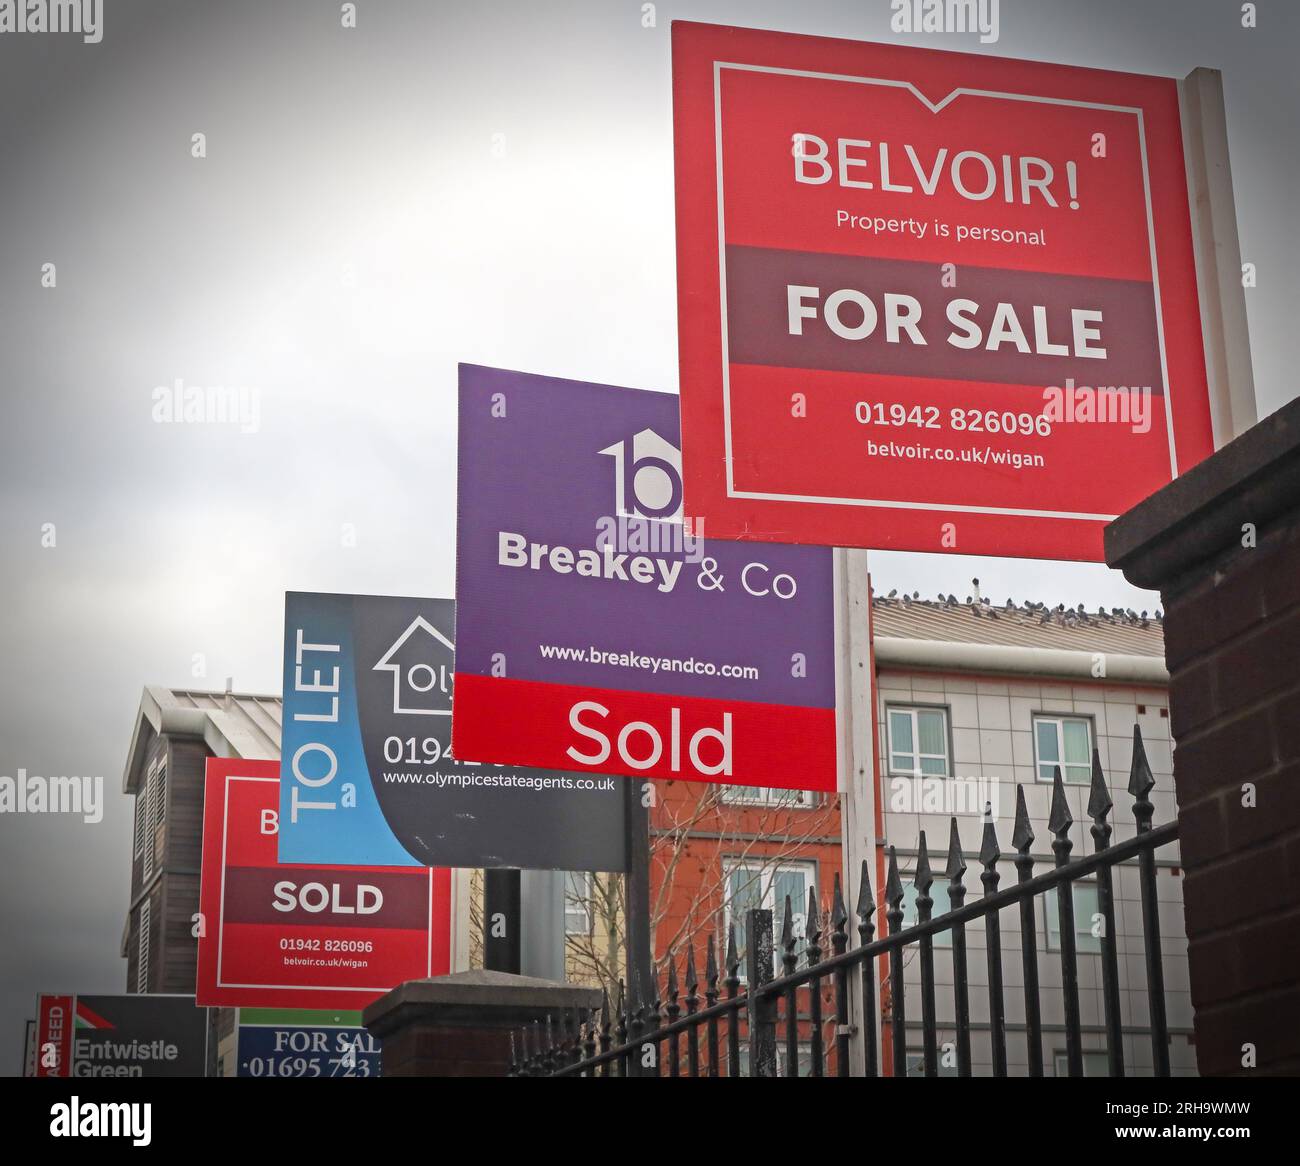 Belvoir, Breakey & Co, for sale, to let signs, flats in an unaffordable housing market, Wigan, Greater Manchester, Lancs, England, UK, WN1 Stock Photo